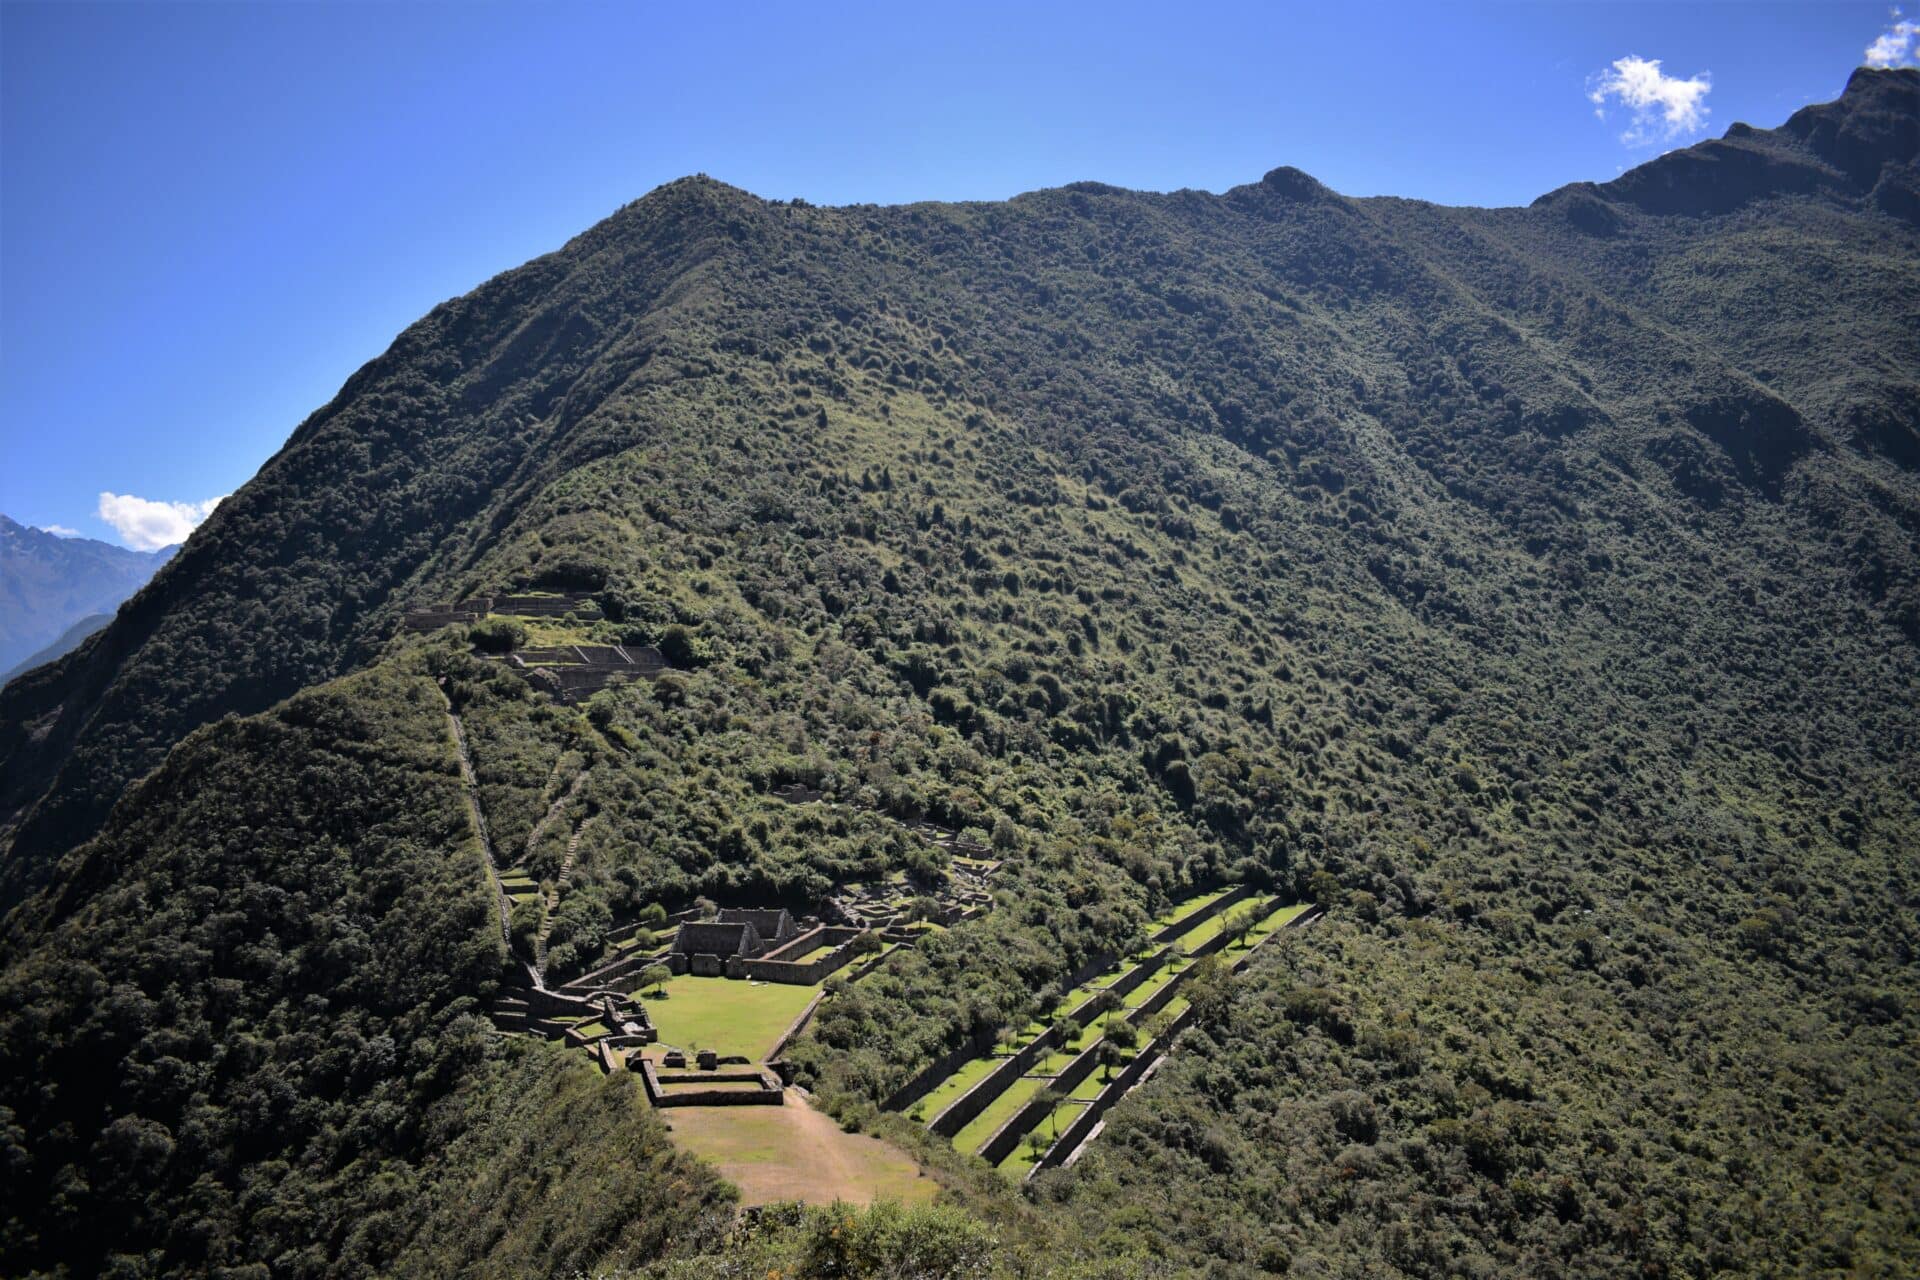 ancient Incan terraces and buildings uncovered at the slopes of a lush mountain